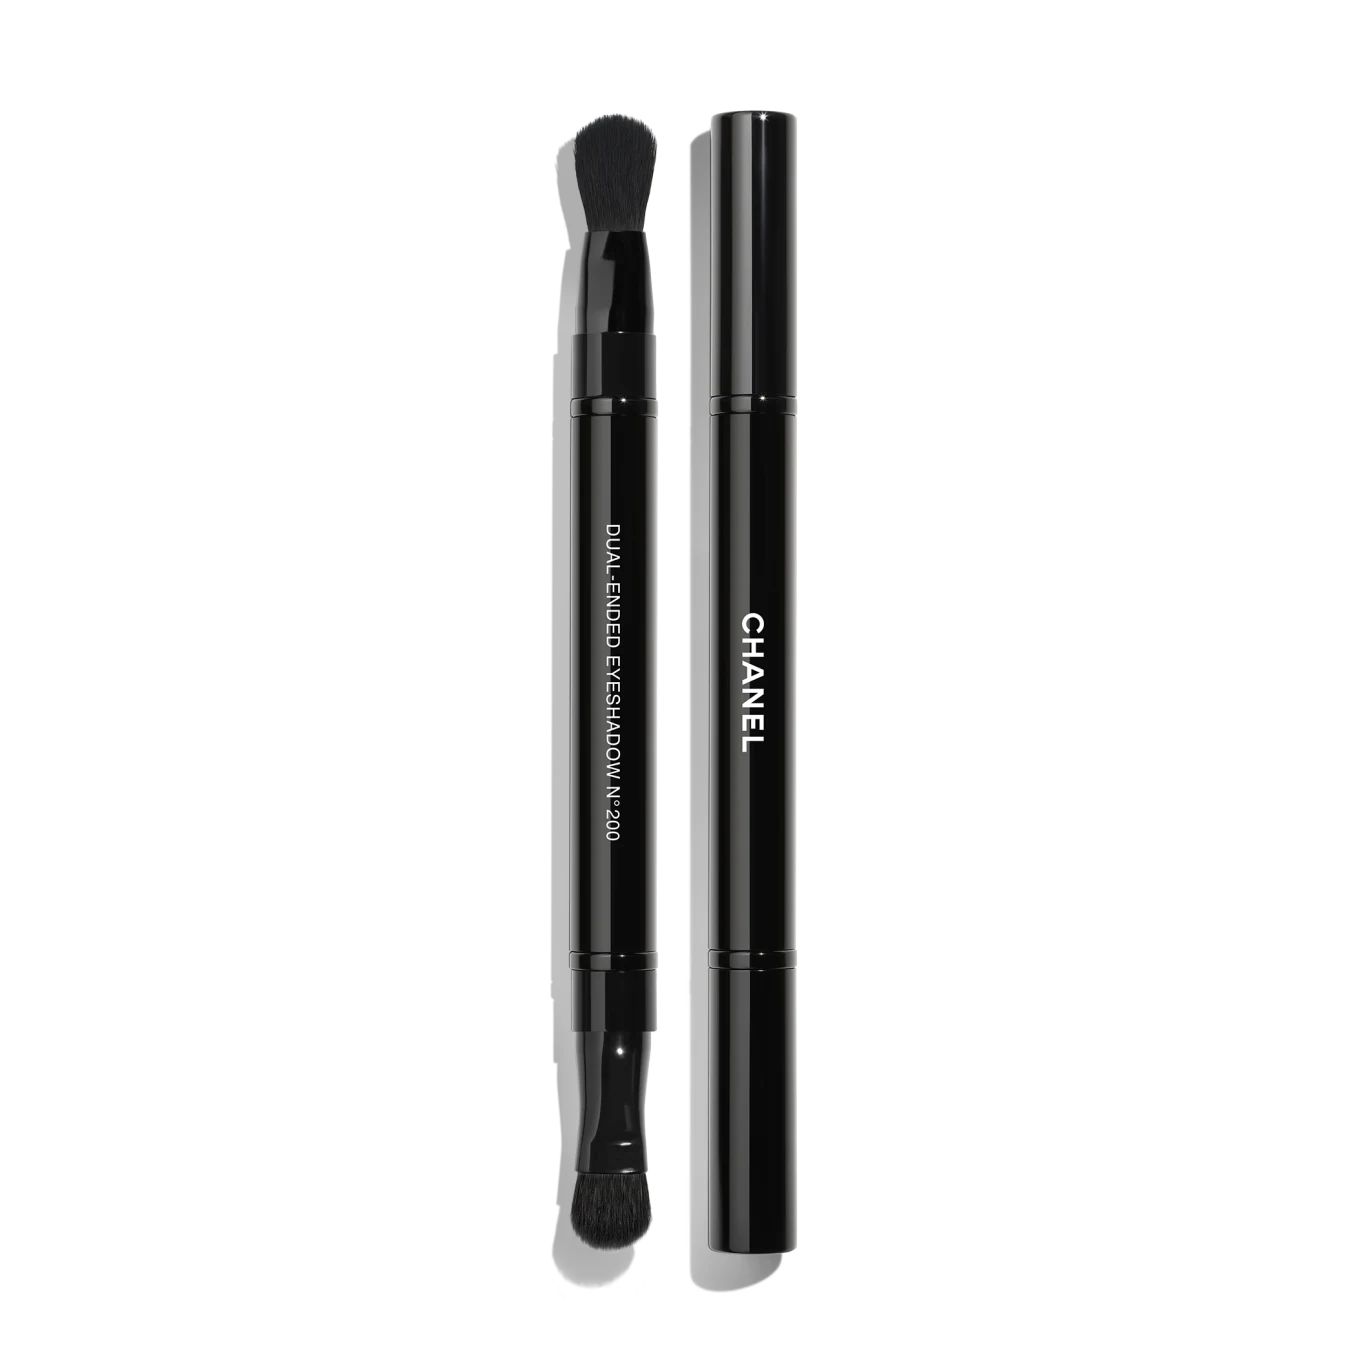 LES PINCEAUX DE CHANEL

            
            Retractable Dual-Ended Eyeshadow Brush N°200 | Chanel, Inc. (US)